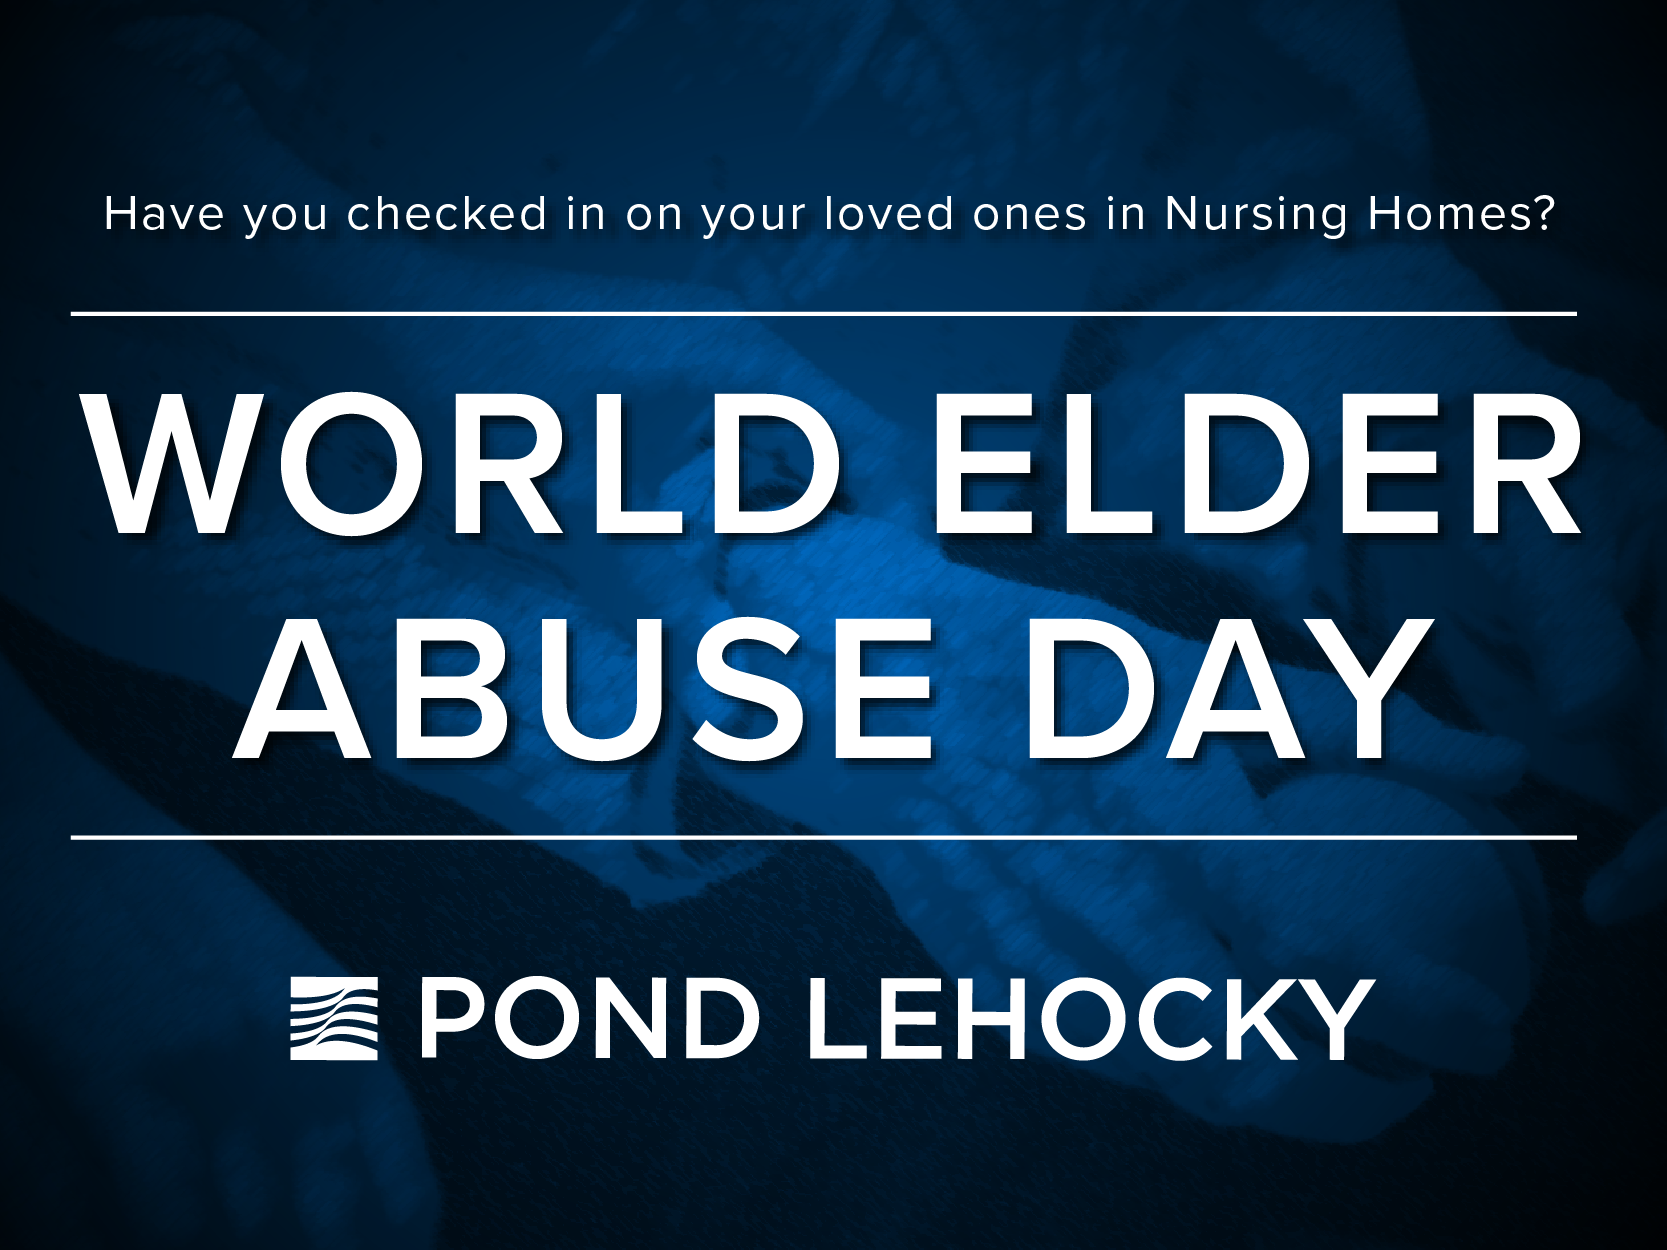 Have you checked in on your loved ones in Nursing Homes?